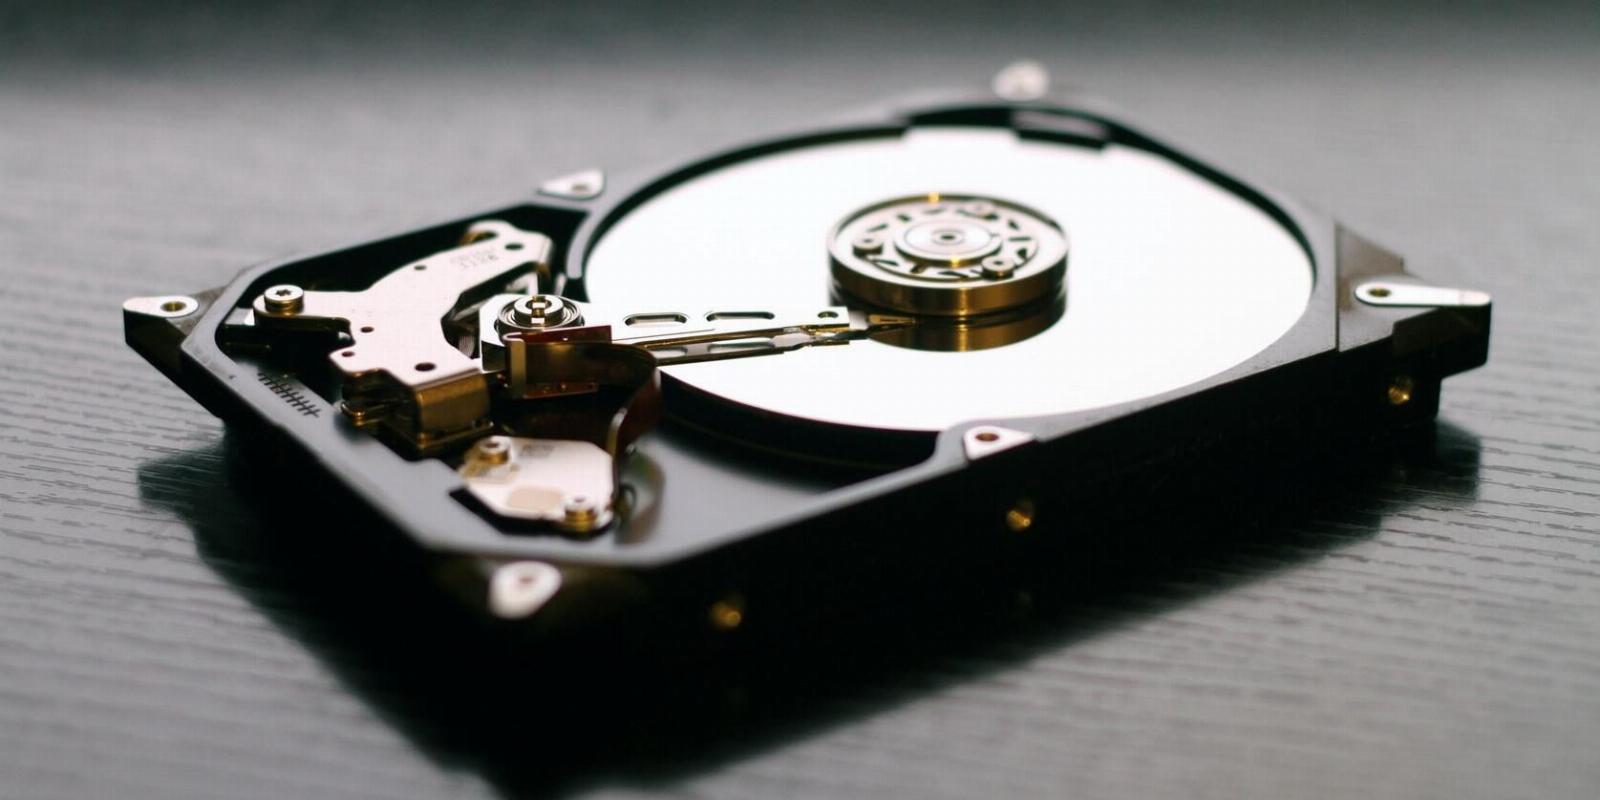 How to See What Is Taking Up Too Much Disk Space on Your Windows PC